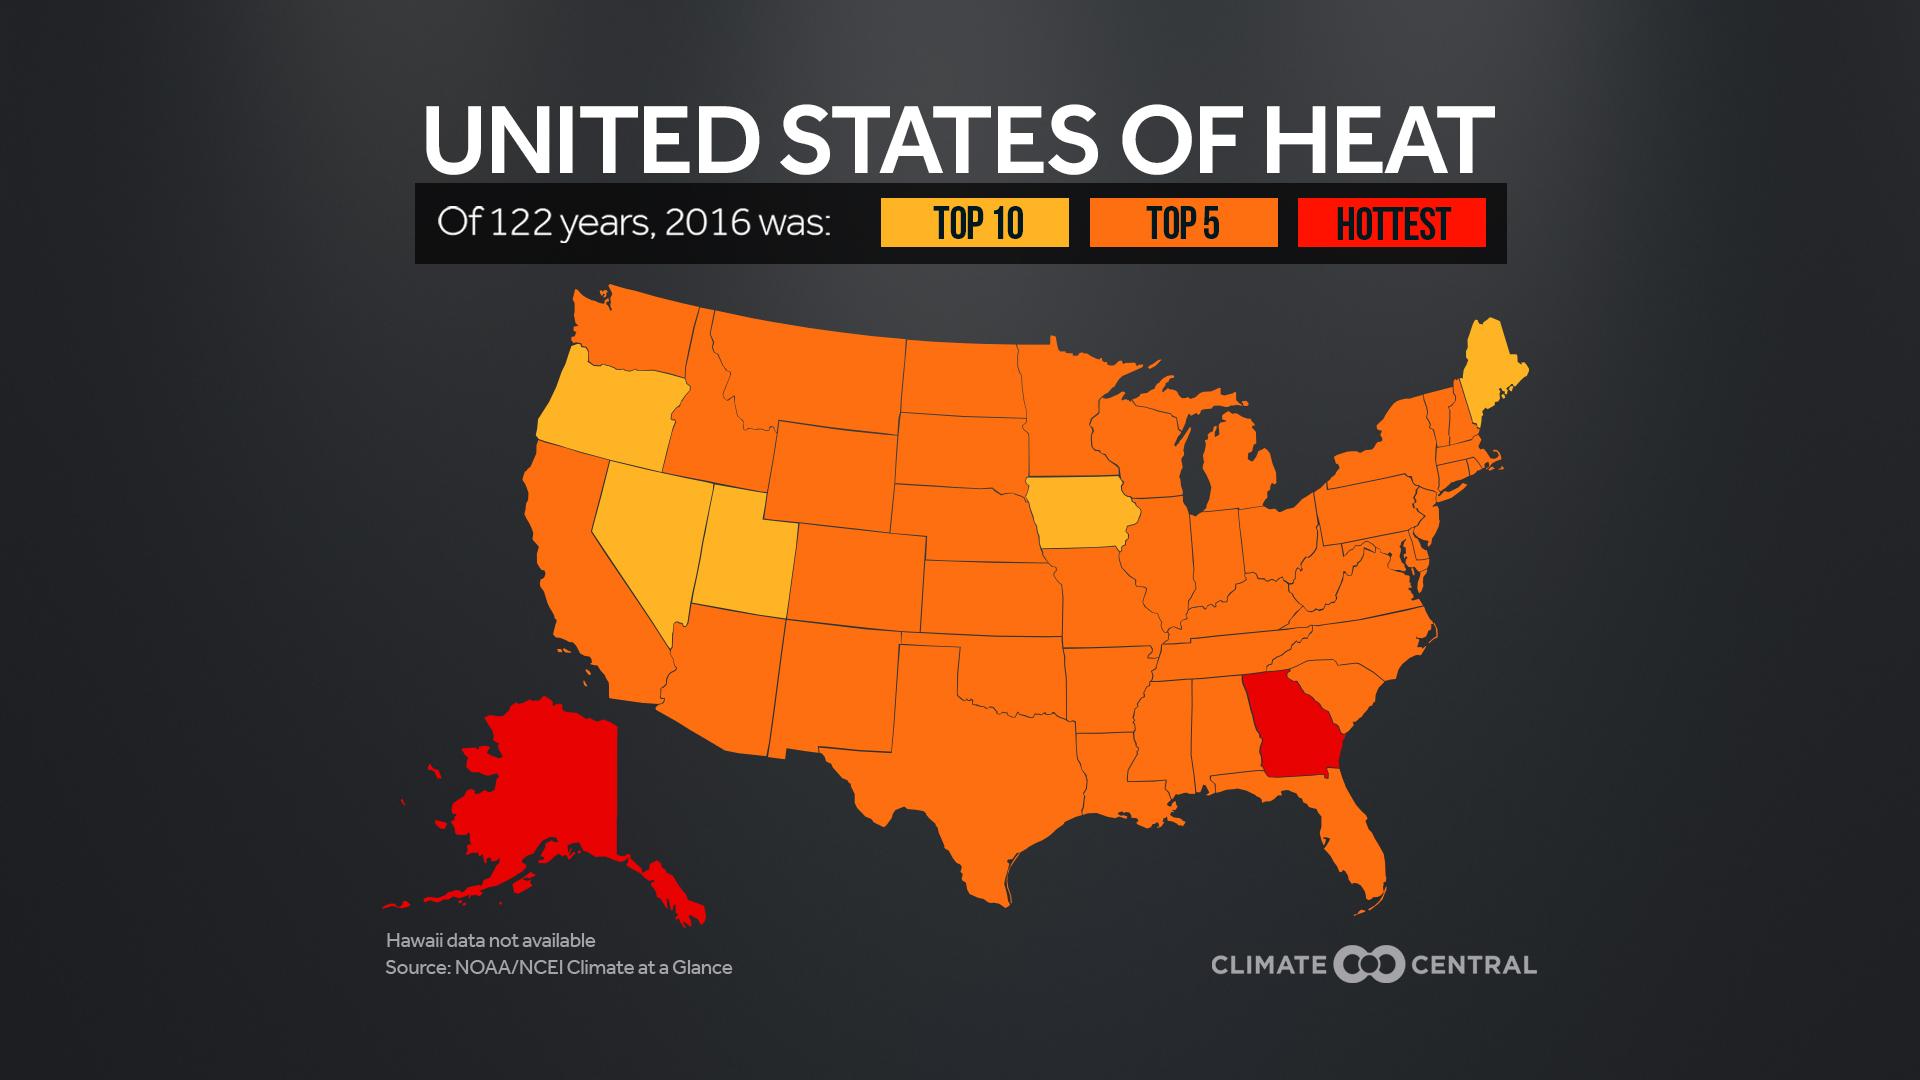 Set 1 - 2016: 2nd Hottest Year in the U.S.